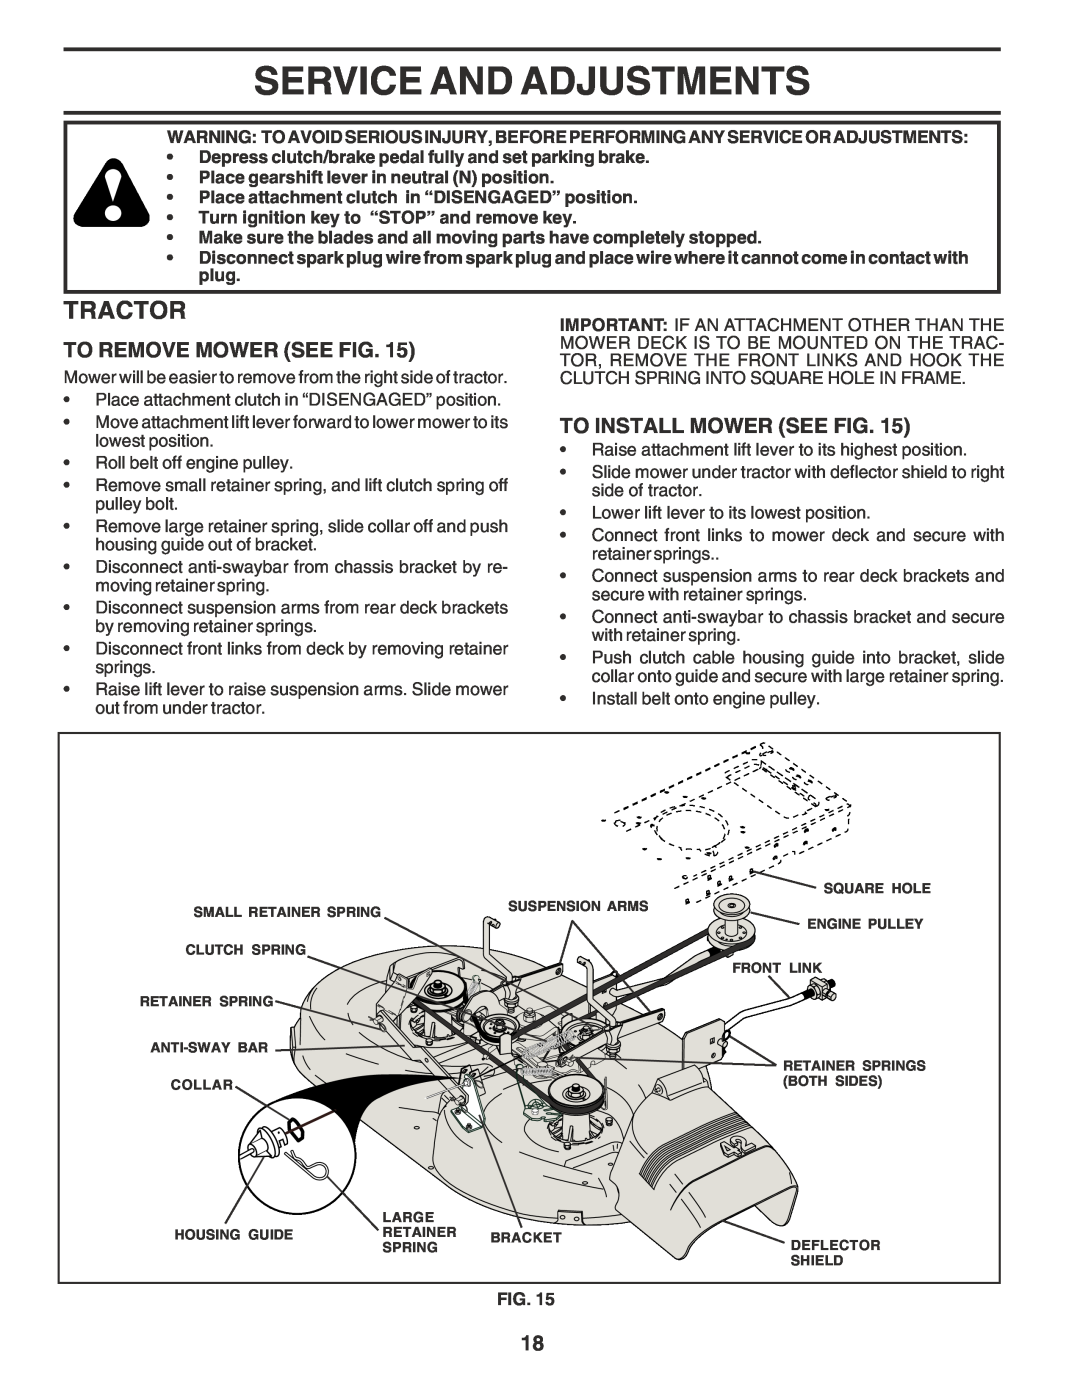 Poulan PR17542STC owner manual Service And Adjustments, To Remove Mower See Fig, To Install Mower See Fig, Tractor 